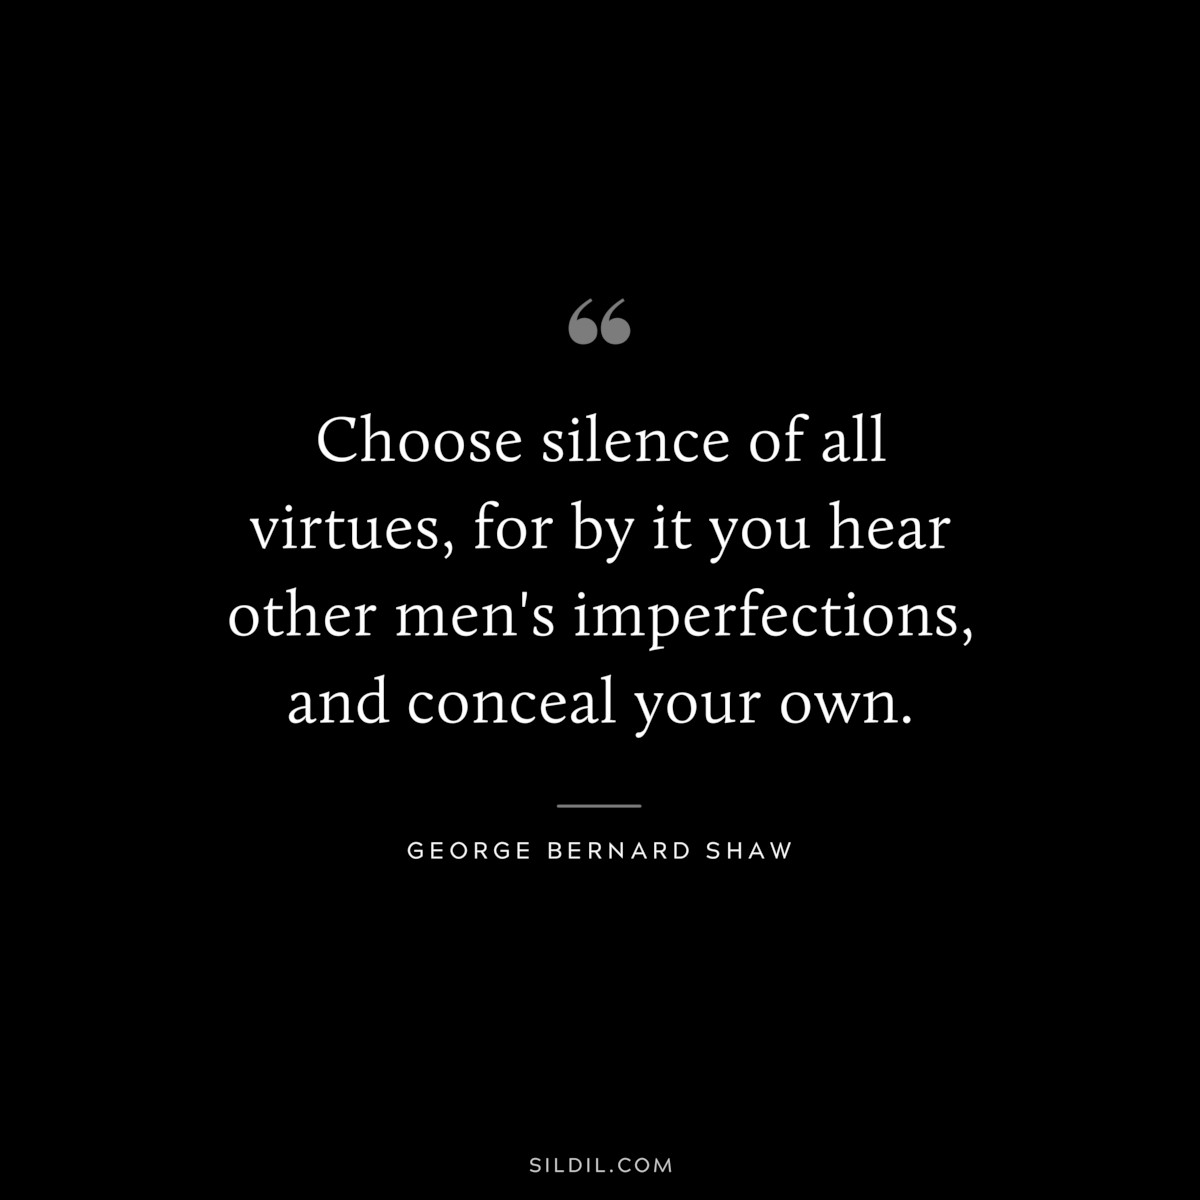 Choose silence of all virtues, for by it you hear other men's imperfections, and conceal your own. ― George Bernard Shaw